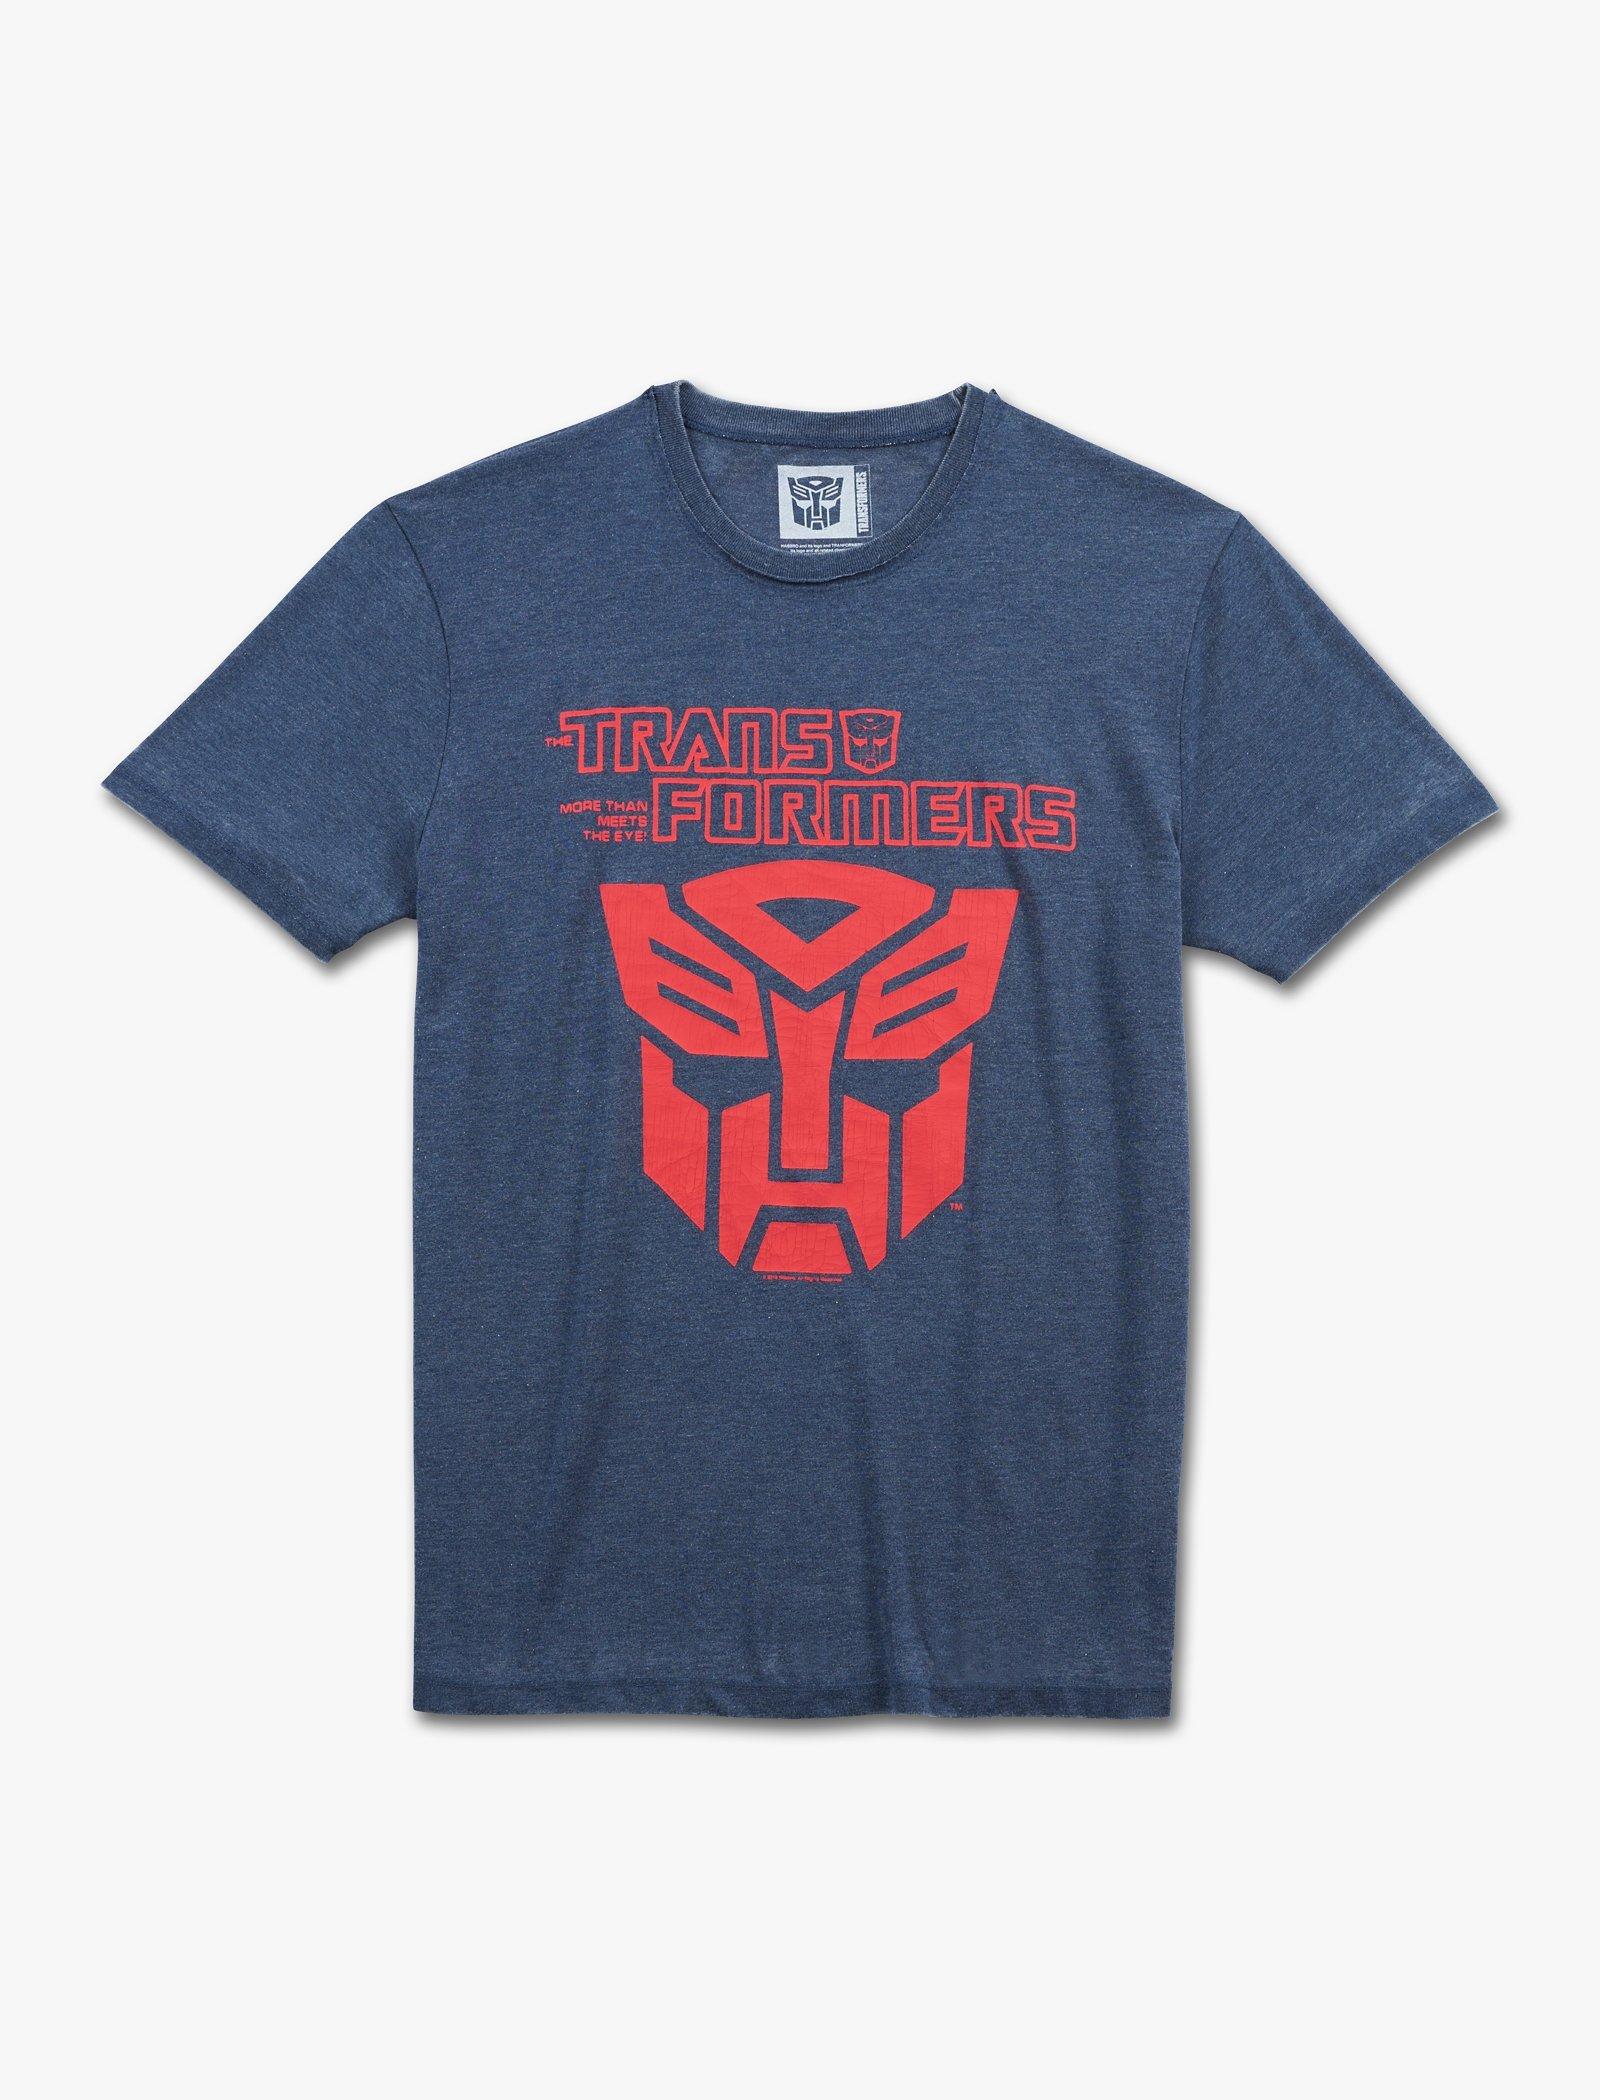 transformers graphic tees